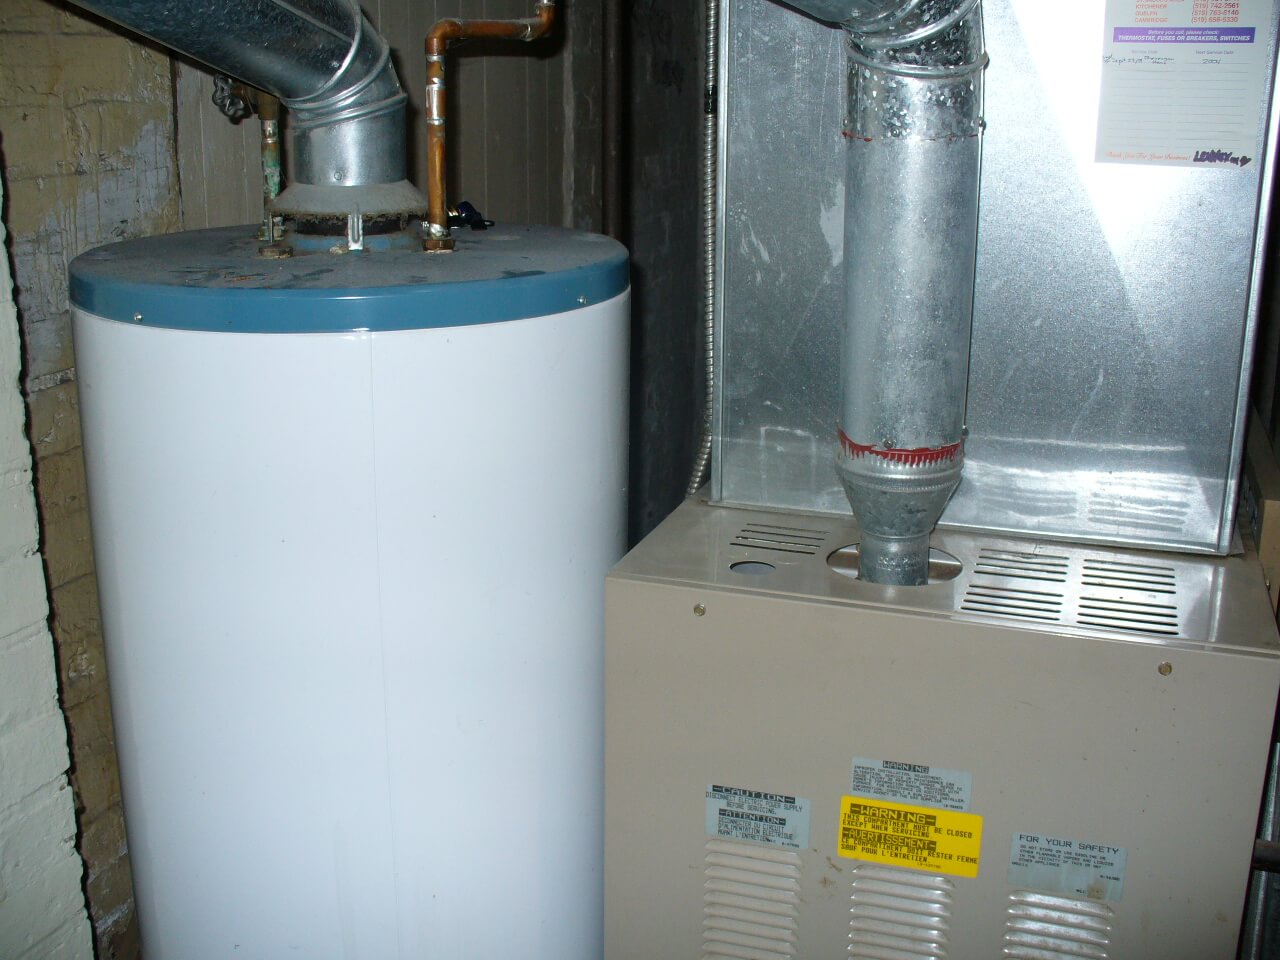 vented-water-heater-and-furnace